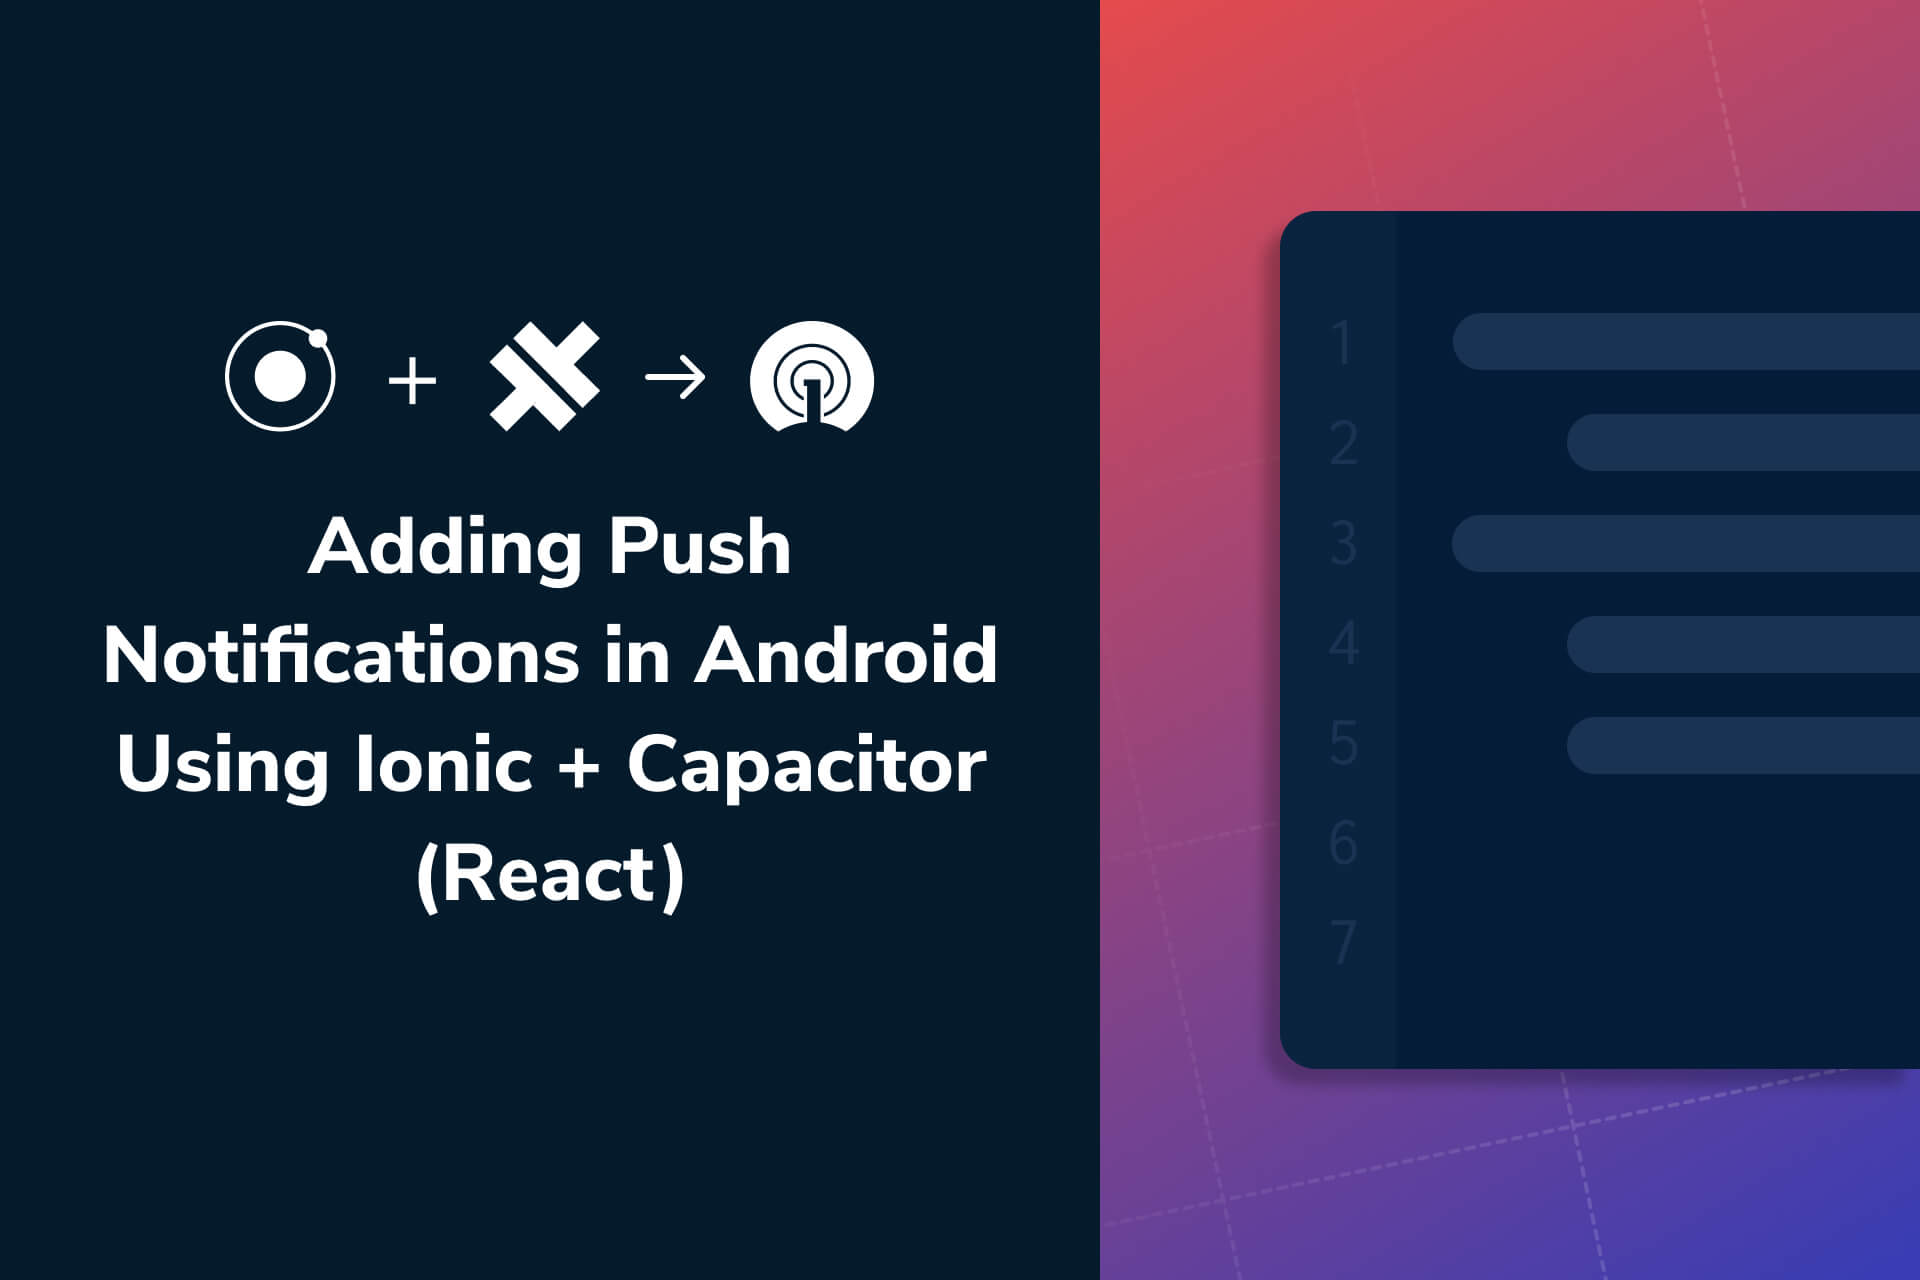 How to add push notifications In Android using Ionic + Capacitor (React)